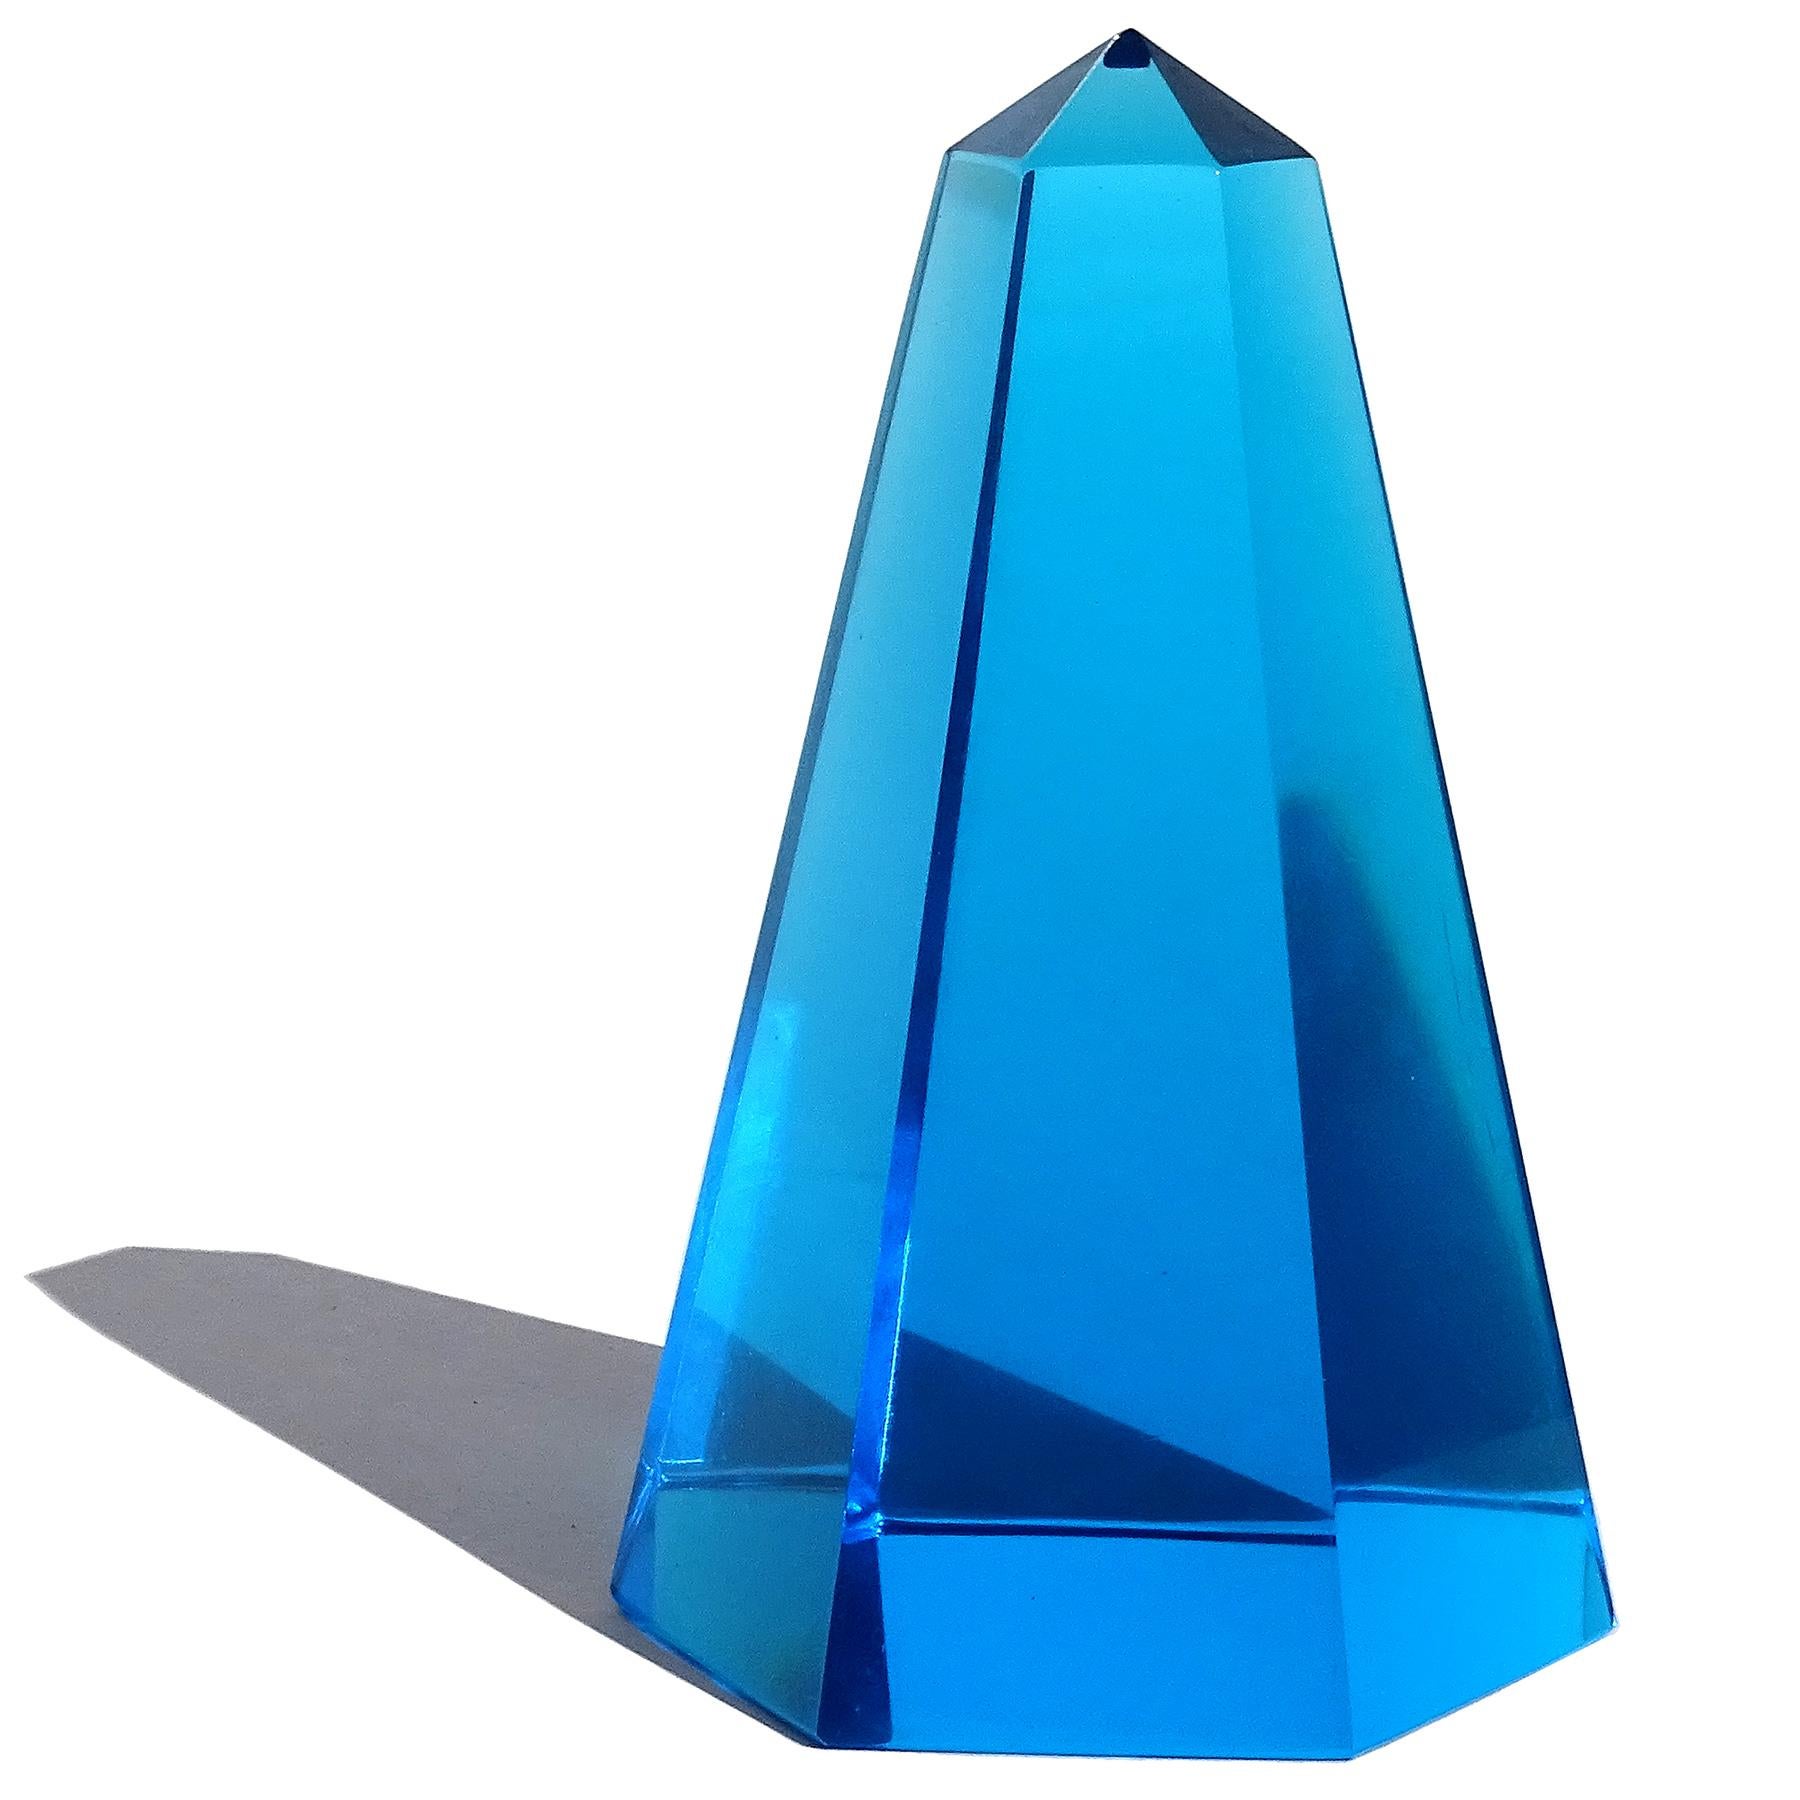 Beautiful vintage Murano hand blown Sommerso cobalt blue Italian art glass obelisk paperweight sculpture. Attributed to designer Archimede Seguso. The piece has 6 sides, and tapper cut at the top to a point. The paperweight has a pyramid design.